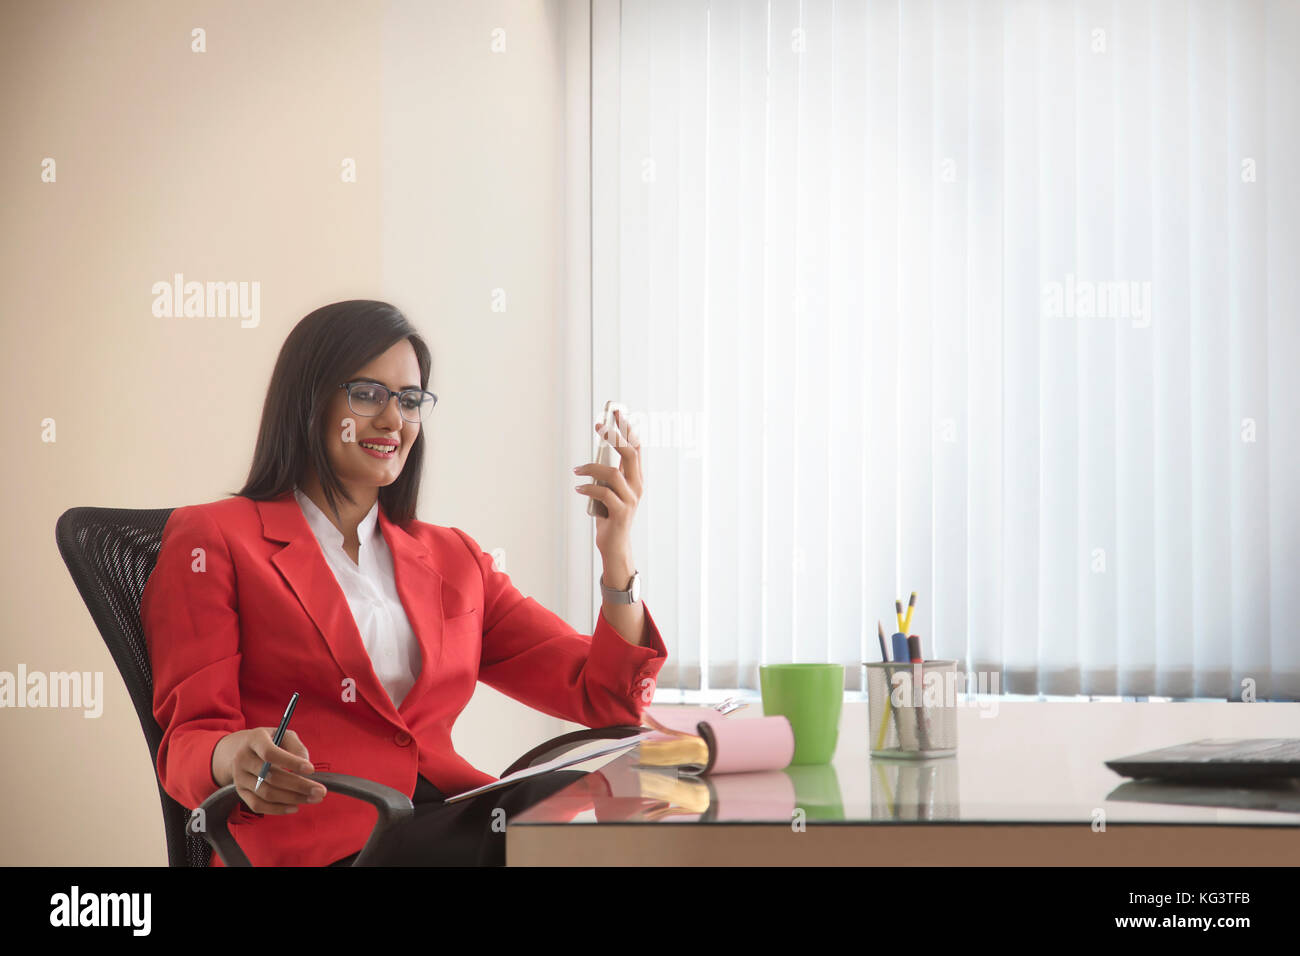 Smiling businesswoman holding cell phone writing in notebook Stock Photo